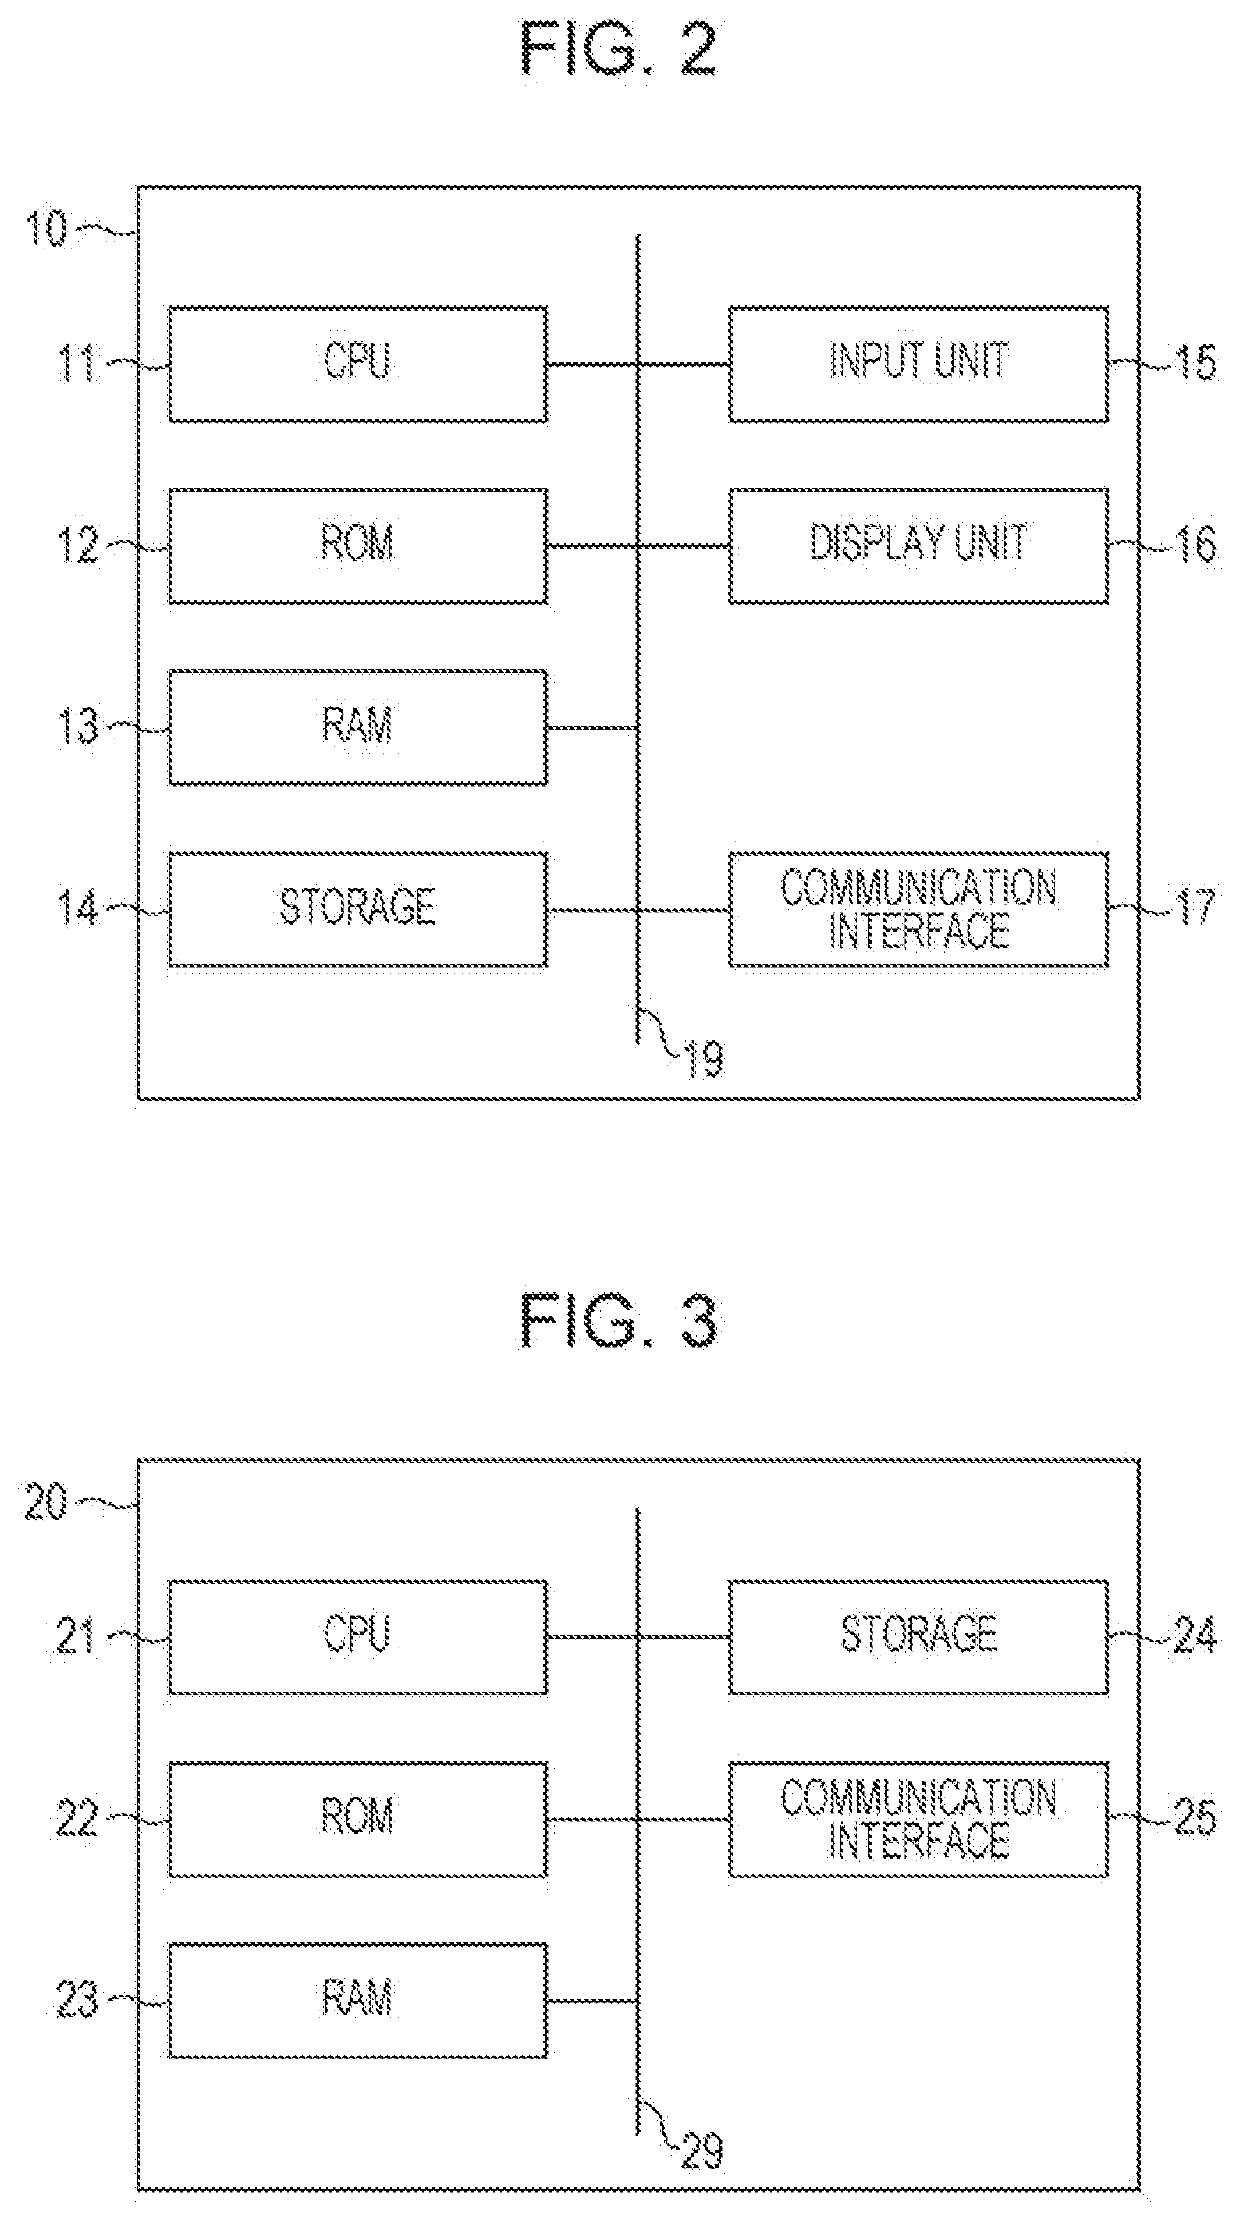 File management system and non-transitory computer readable medium